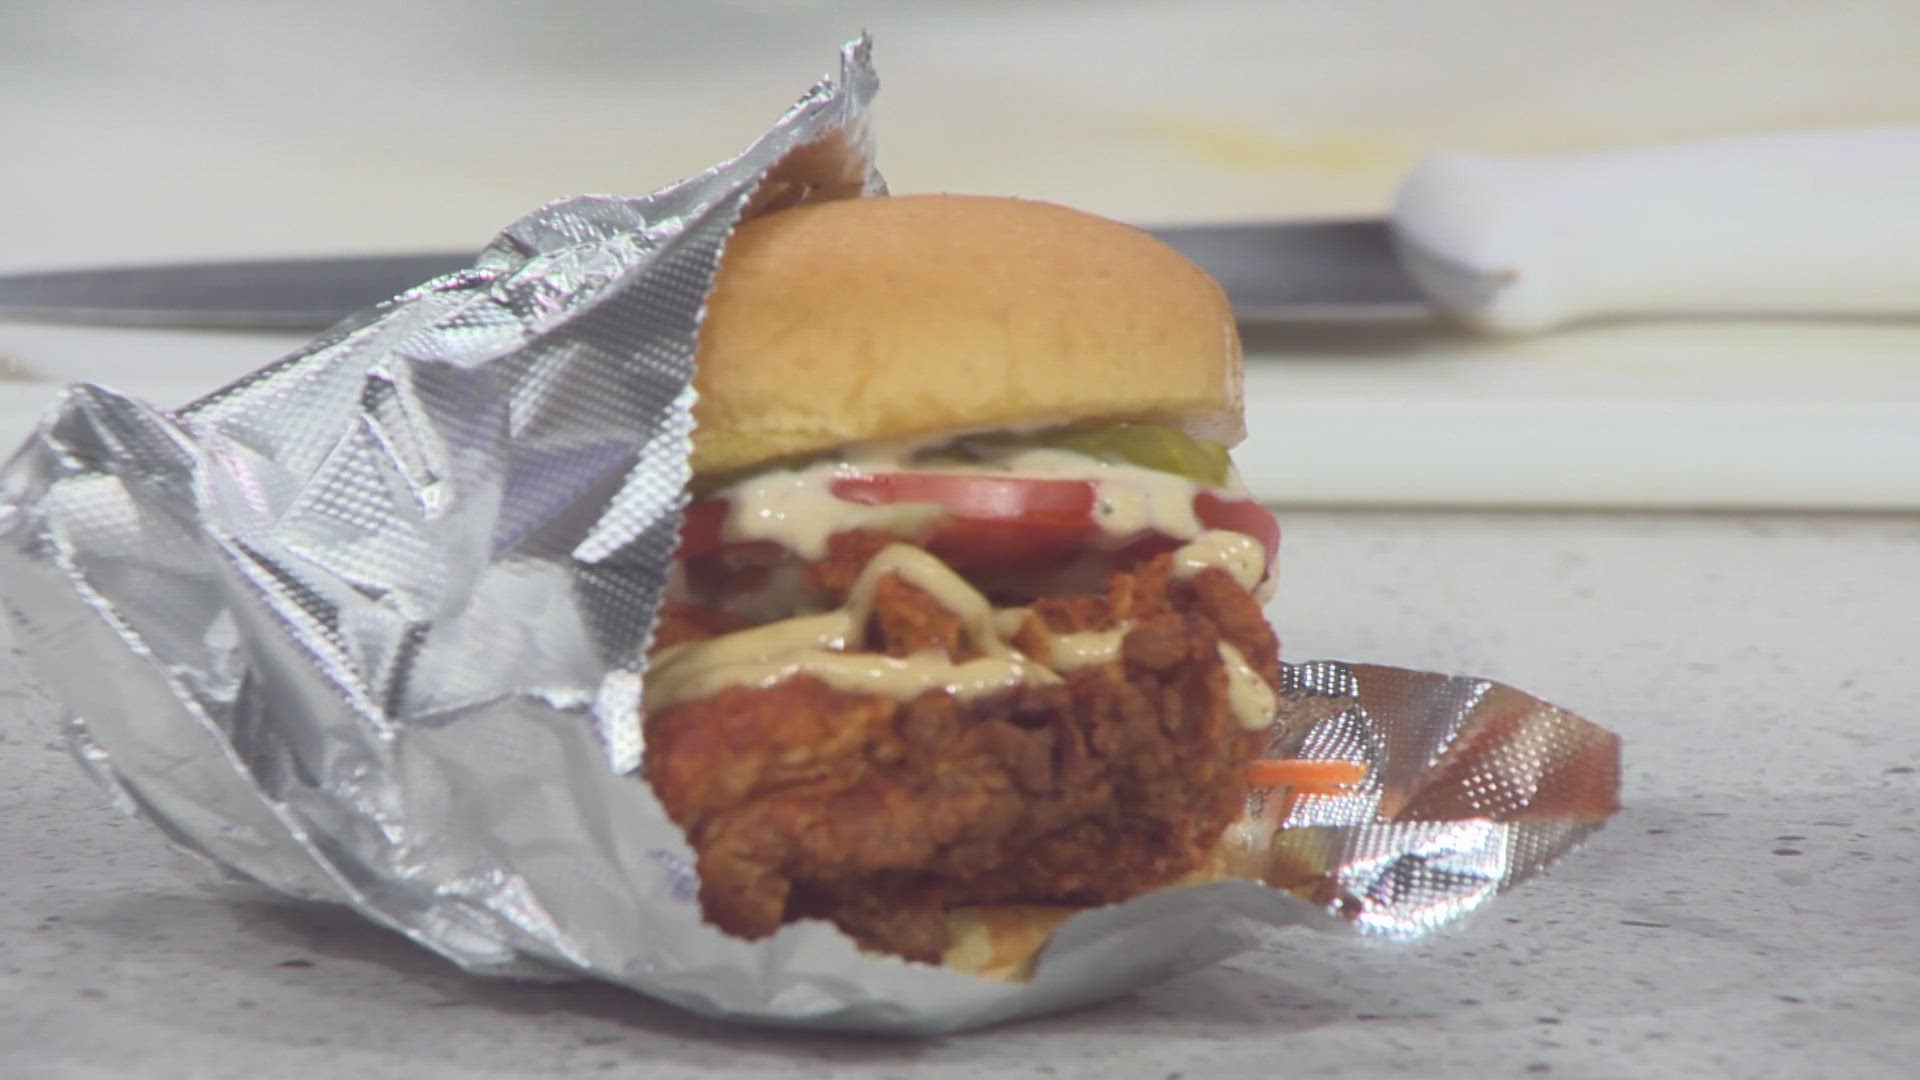 The chefs behind the Southern Food Truck show us how they whip up their award-winning chicken sandwiches. Hint: They don't hold back on the spice!